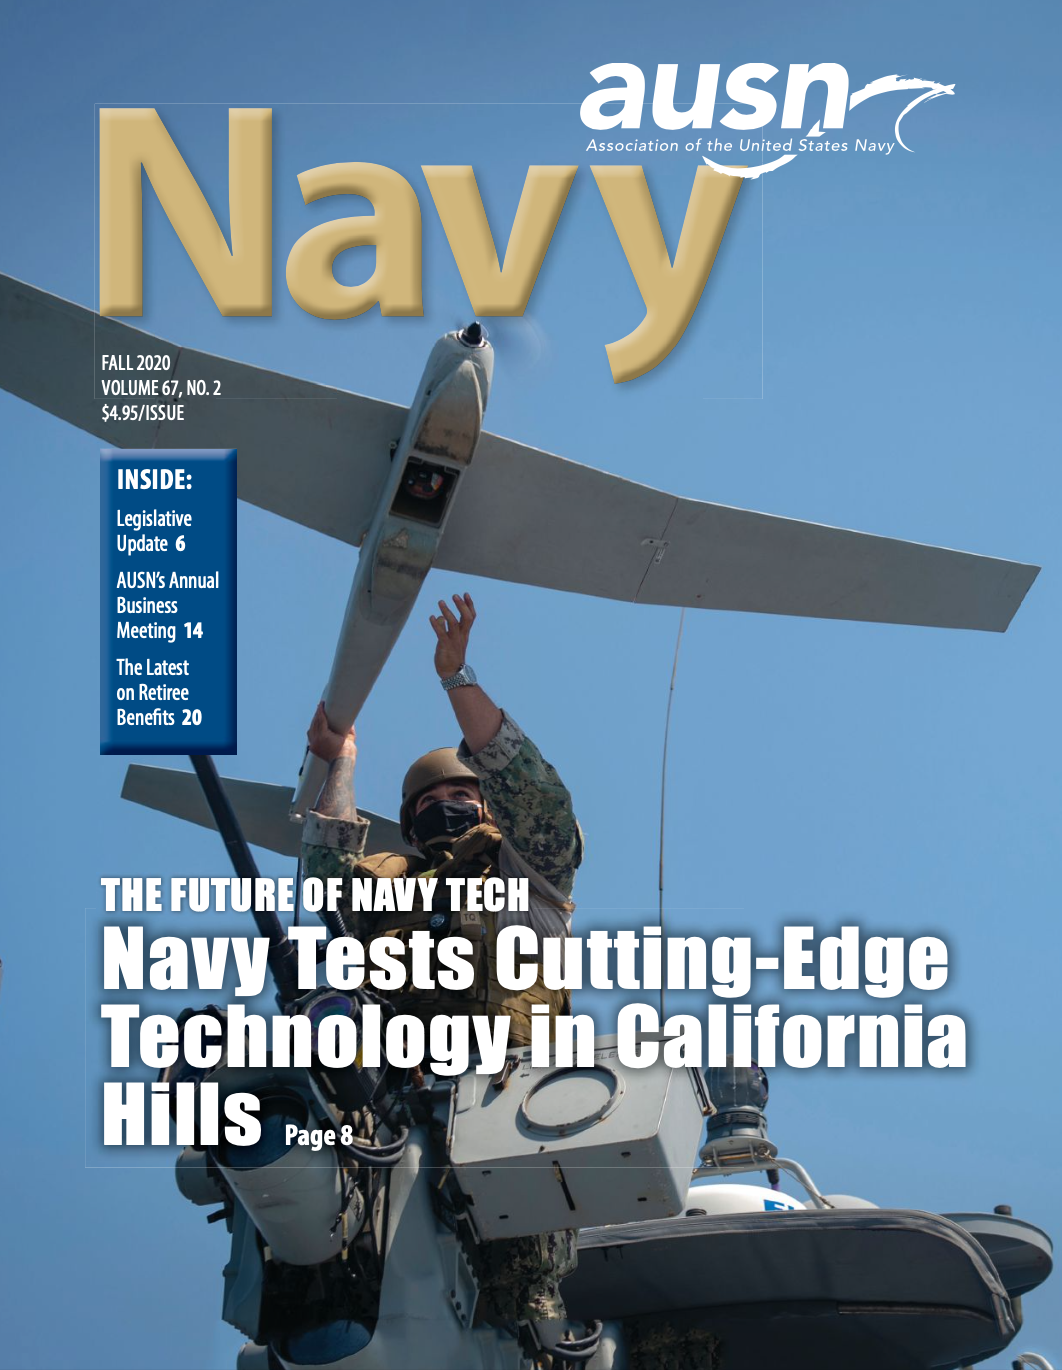 The Future of Navy Technology